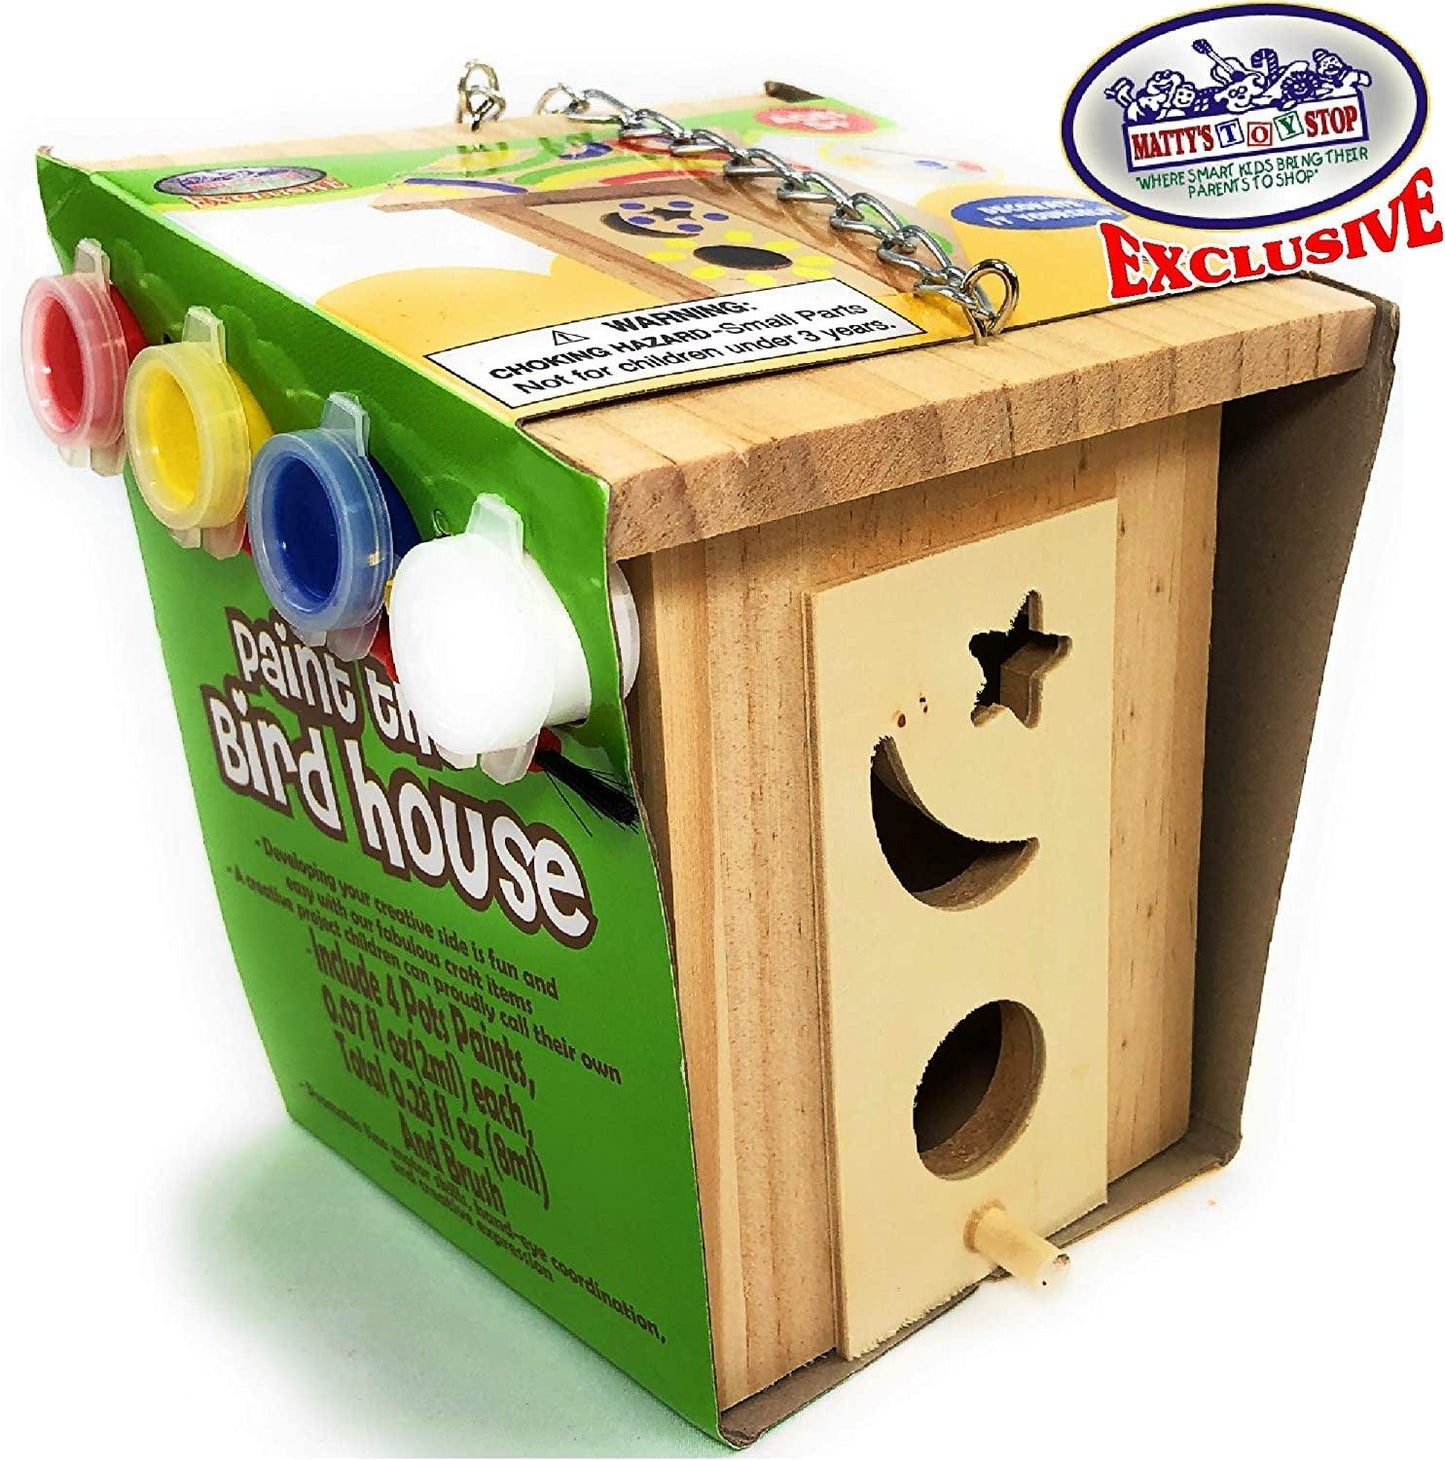 Paint Your Own Small Wooden Birdhouses (Includes Paints & Brushes) Gift Set Bundle - 3 Pack - WoodArtSupply